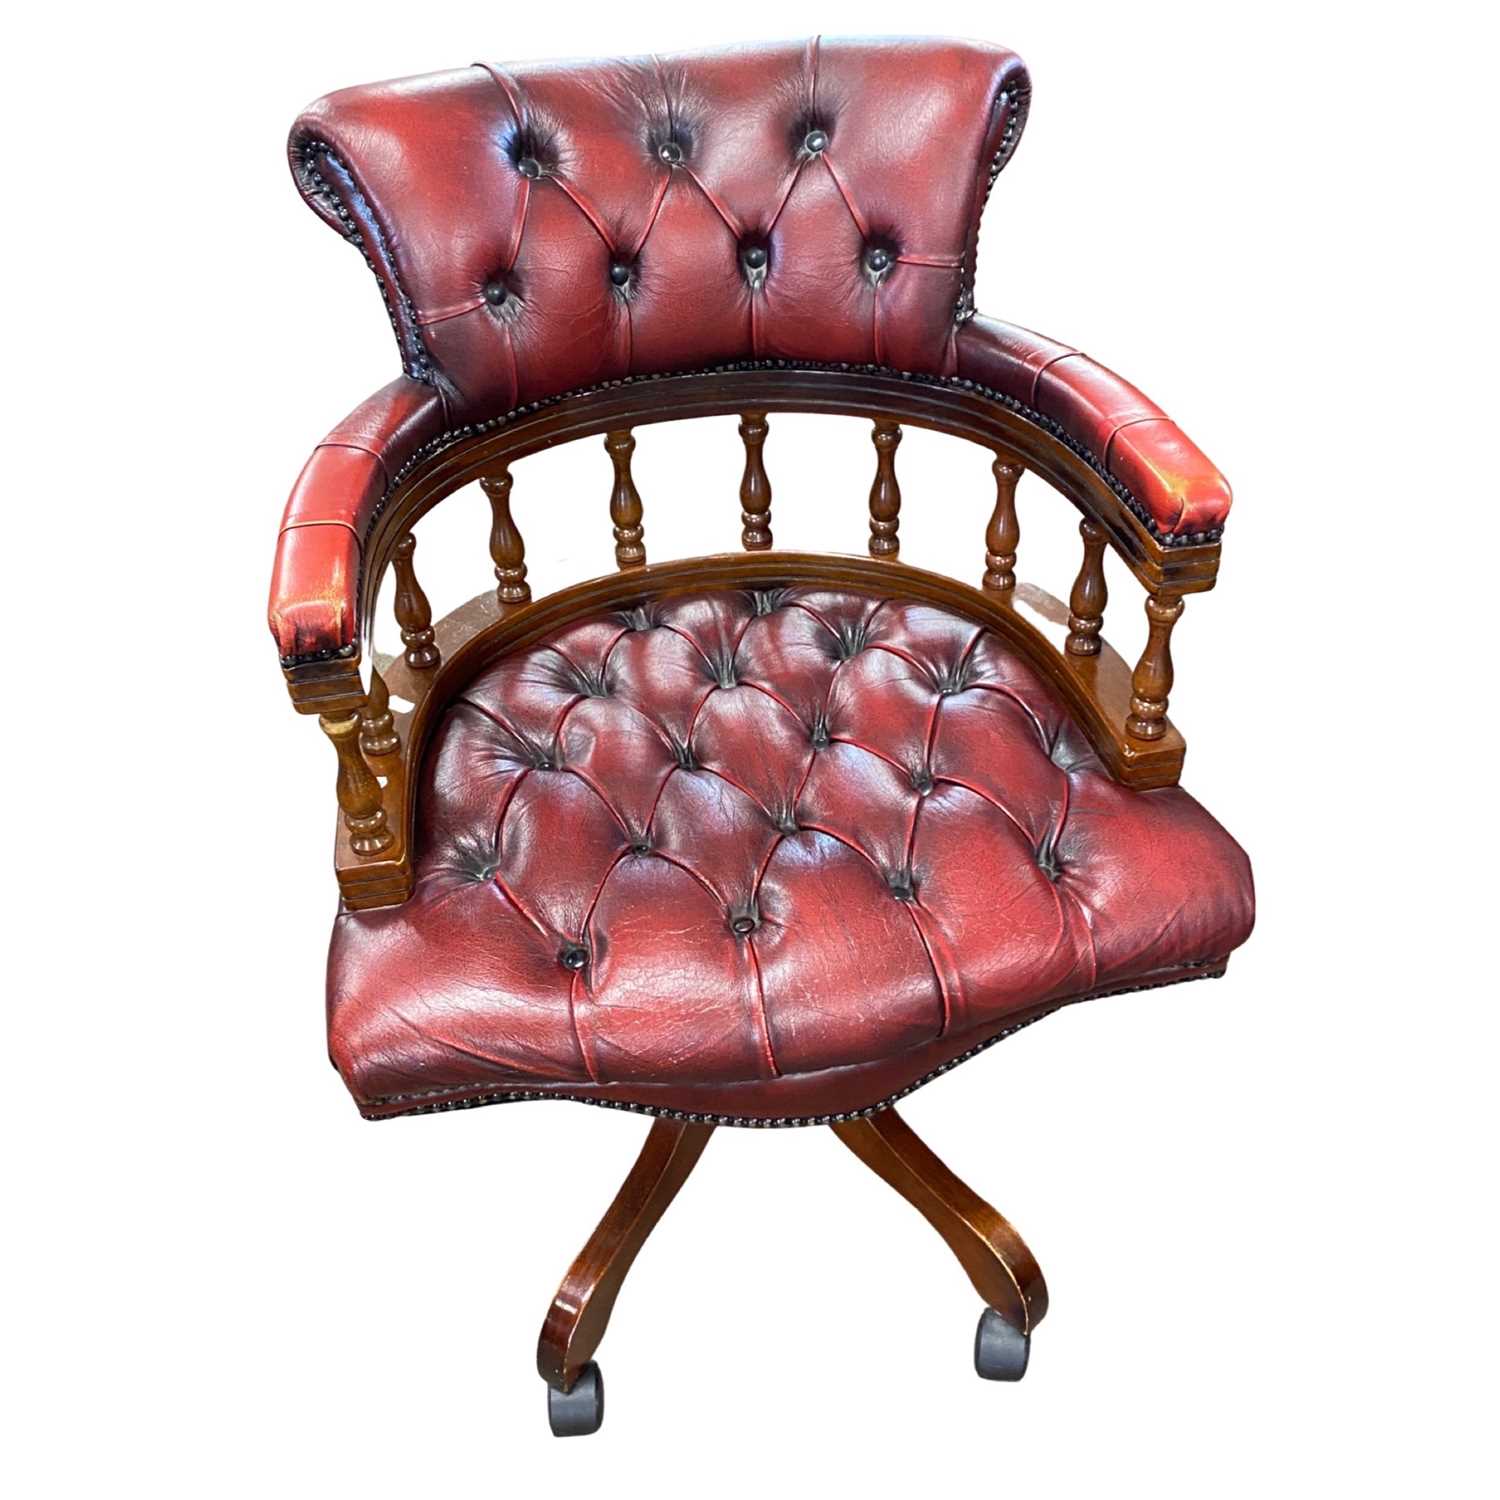 A 20th Century red leather upholstered revolving Captains style office chair, 65cm wide - Image 3 of 4